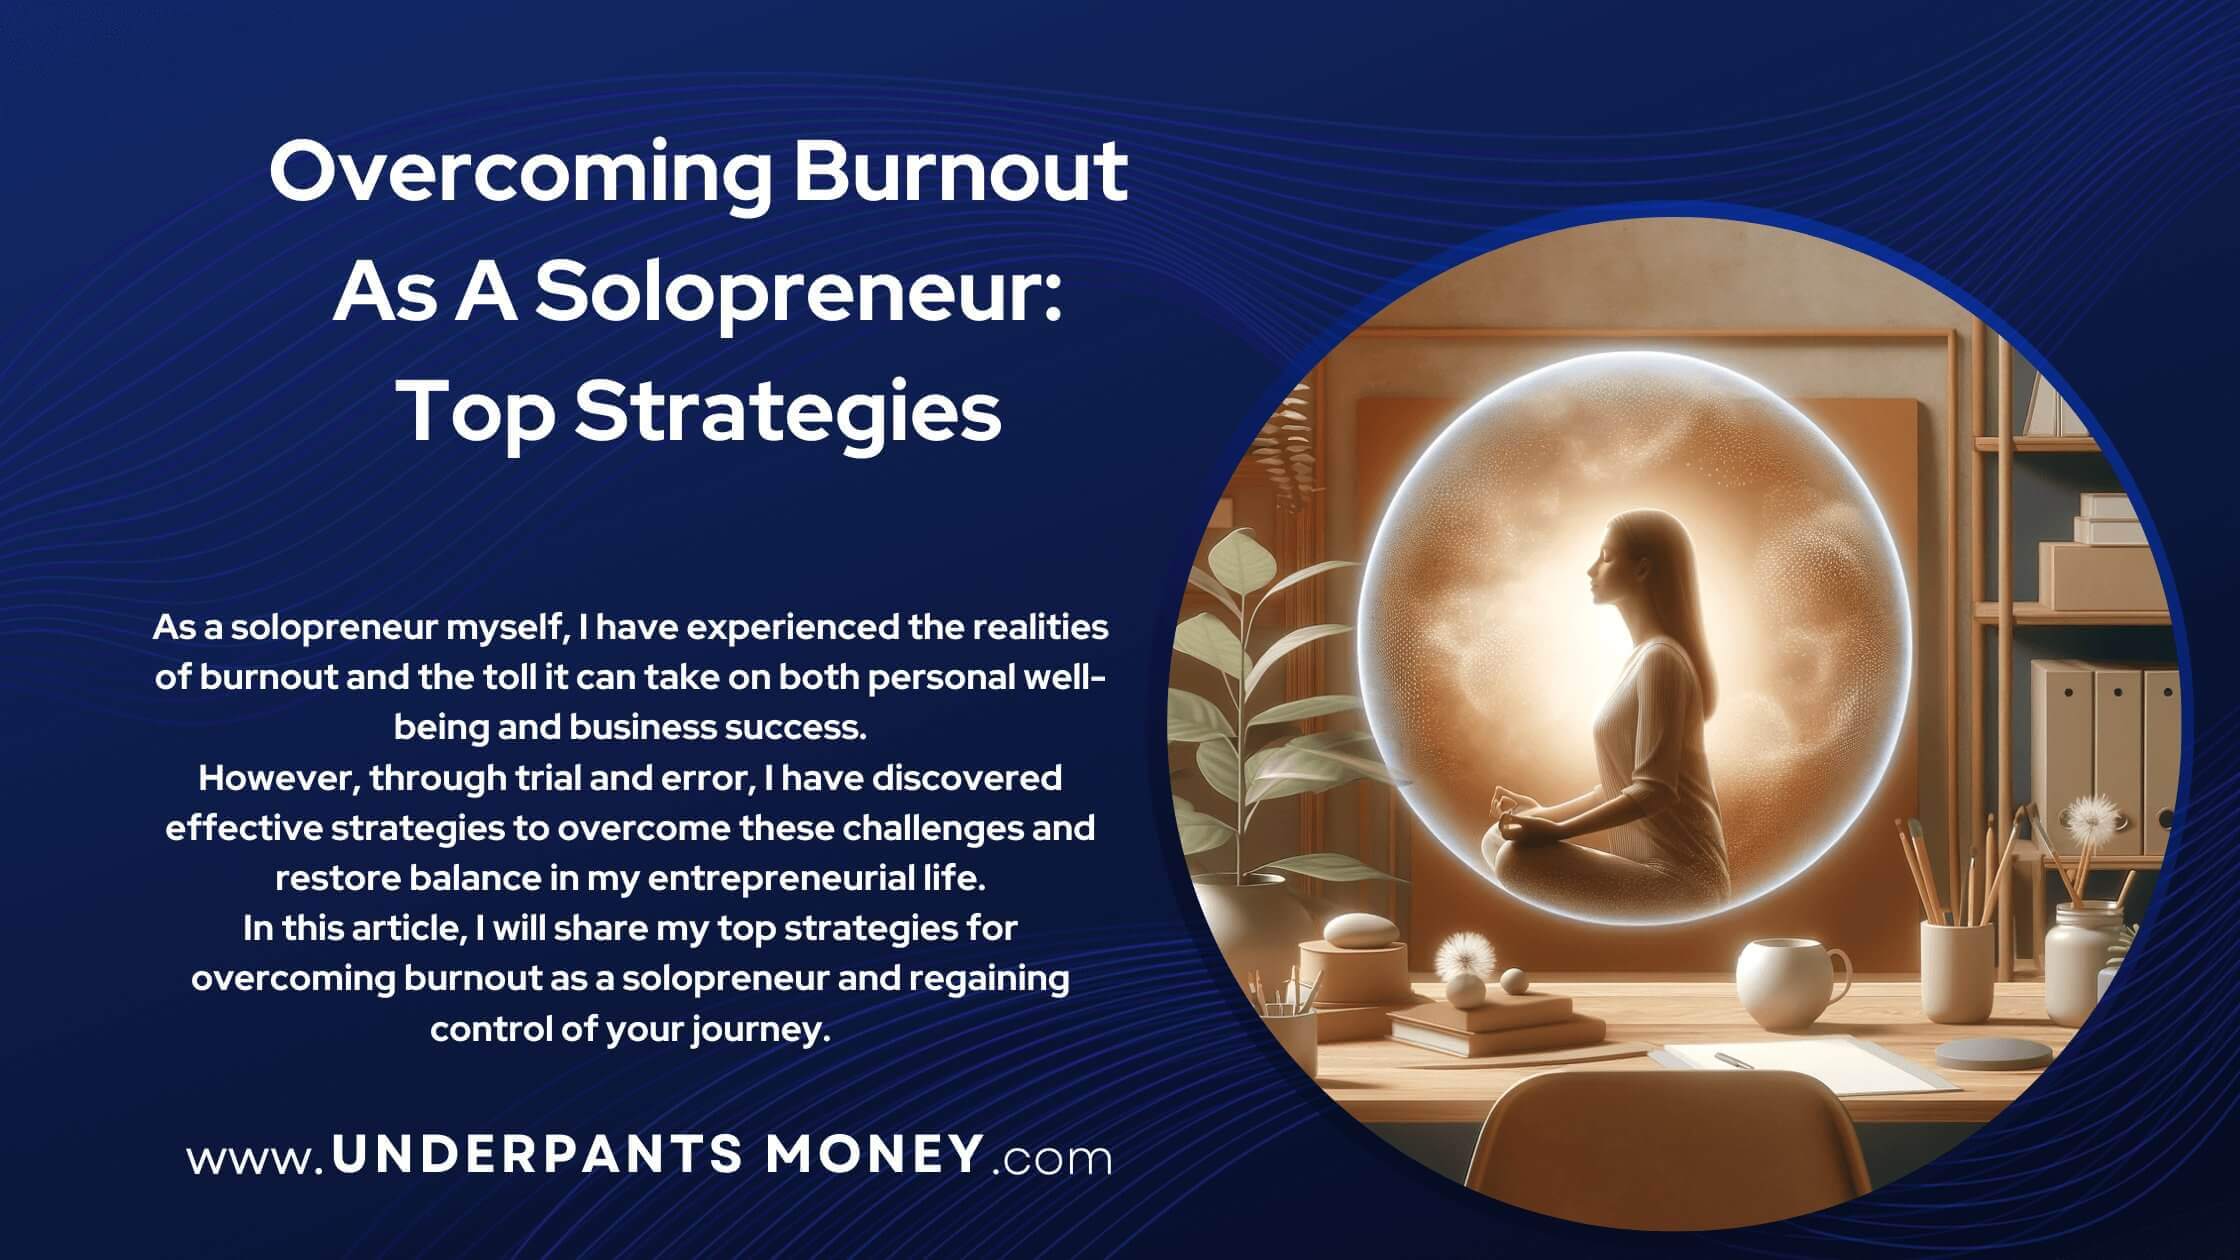 overcoming burnout as a solopreneur title and description on blue with image of woman meditating in relaxing office to the right